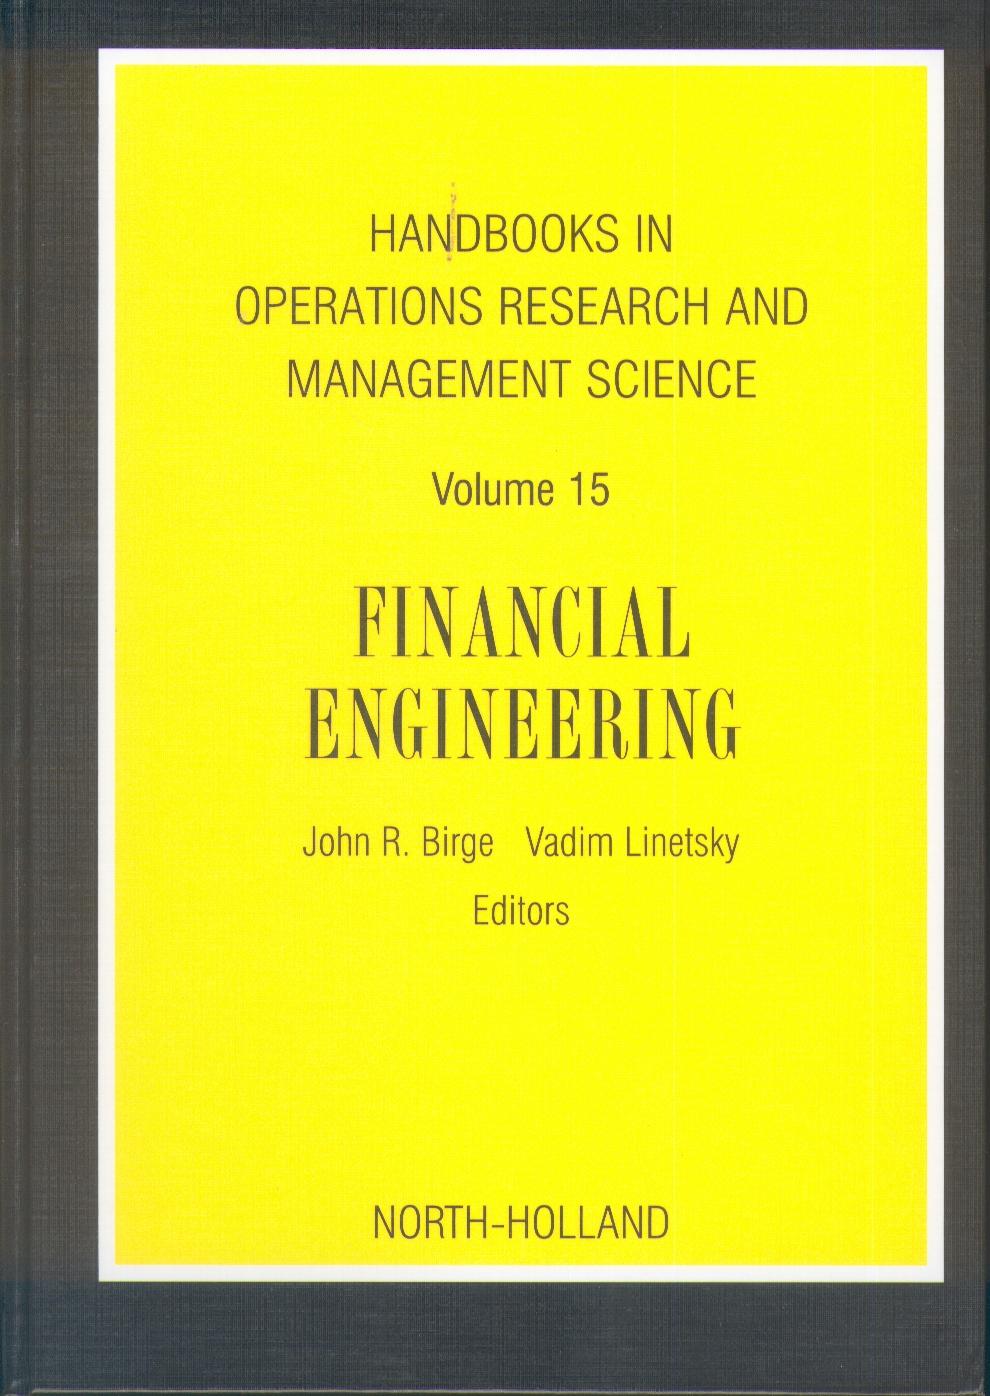 Handbooks In Operations Research And Management Science: Financial Engineering